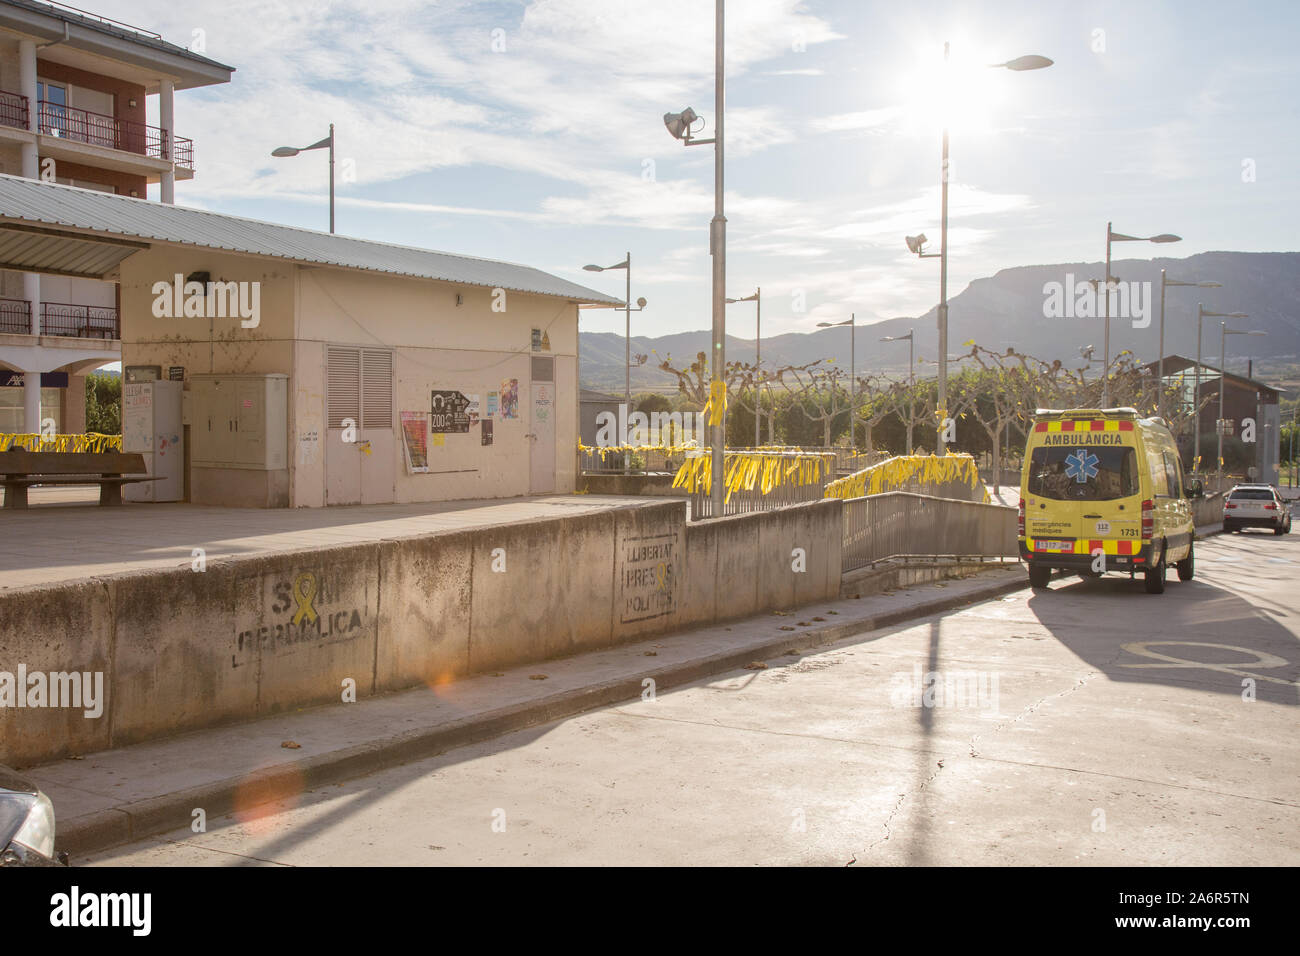 Oliana, Lleida, Catalonia, Spain. 15th October, 2019. Catalan independence slogans and banners on display in the town of Oliana. Stock Photo